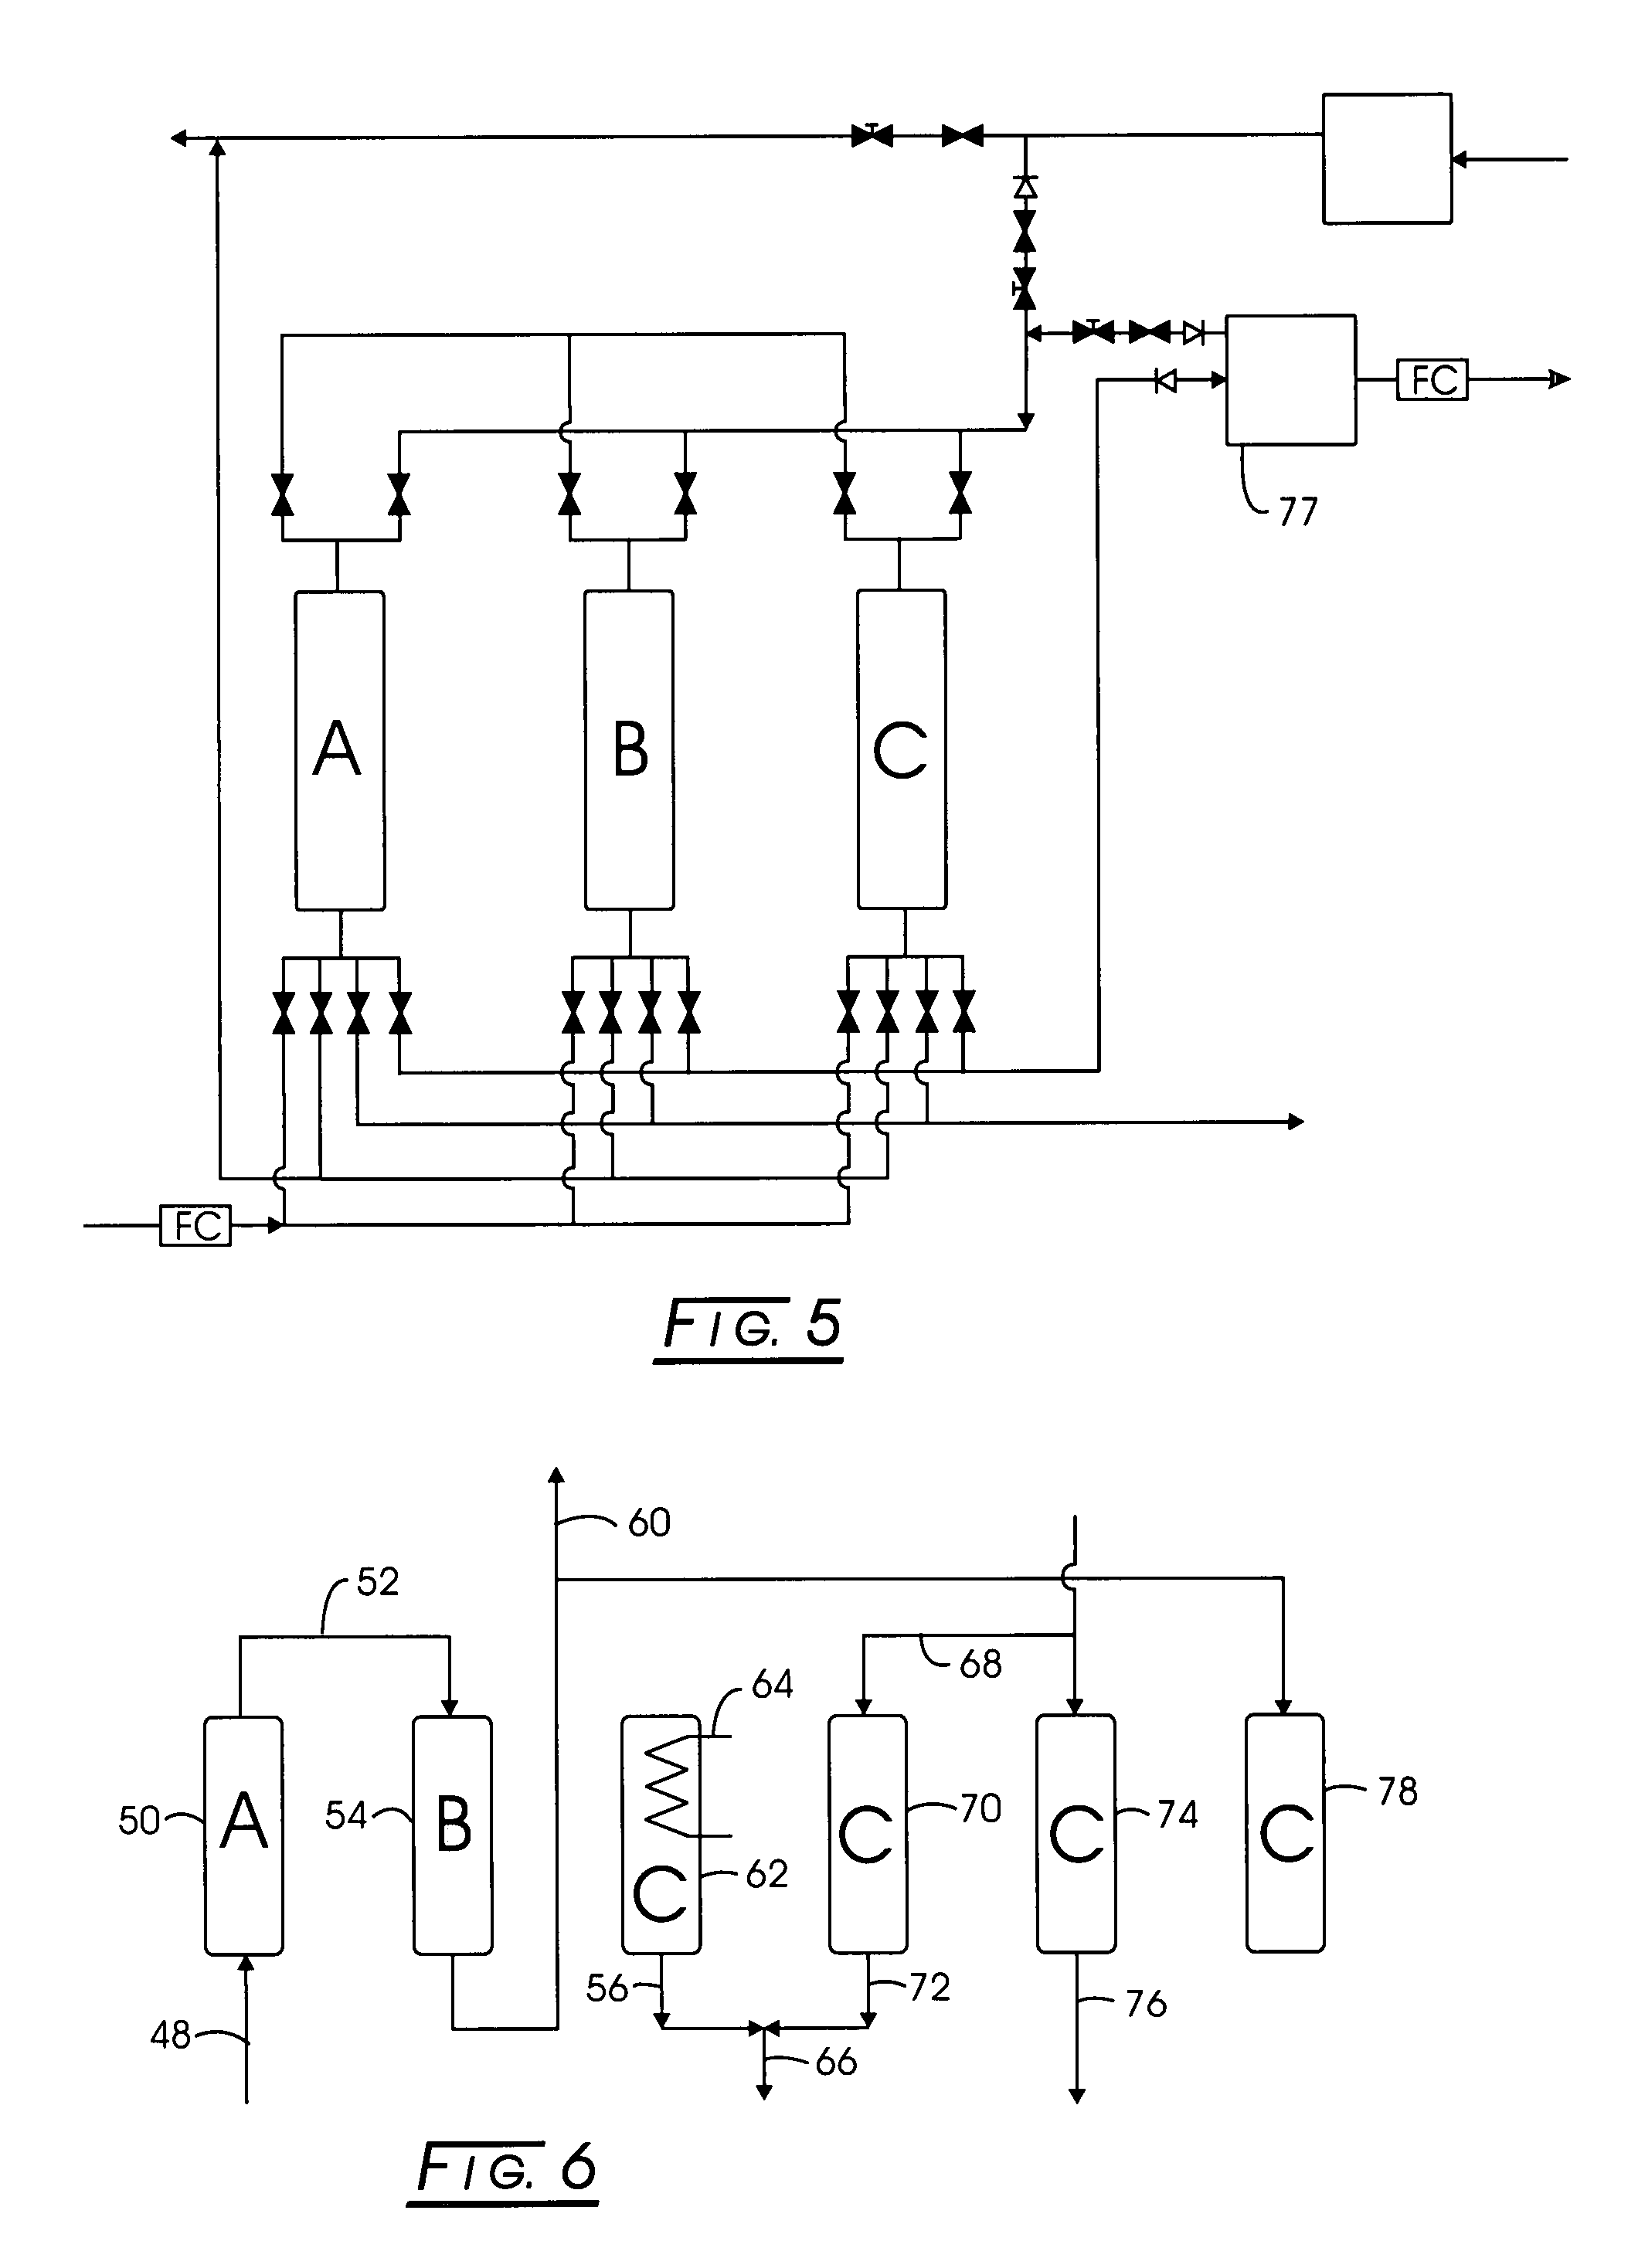 Multi-stage adsorption system for gas mixture sparation